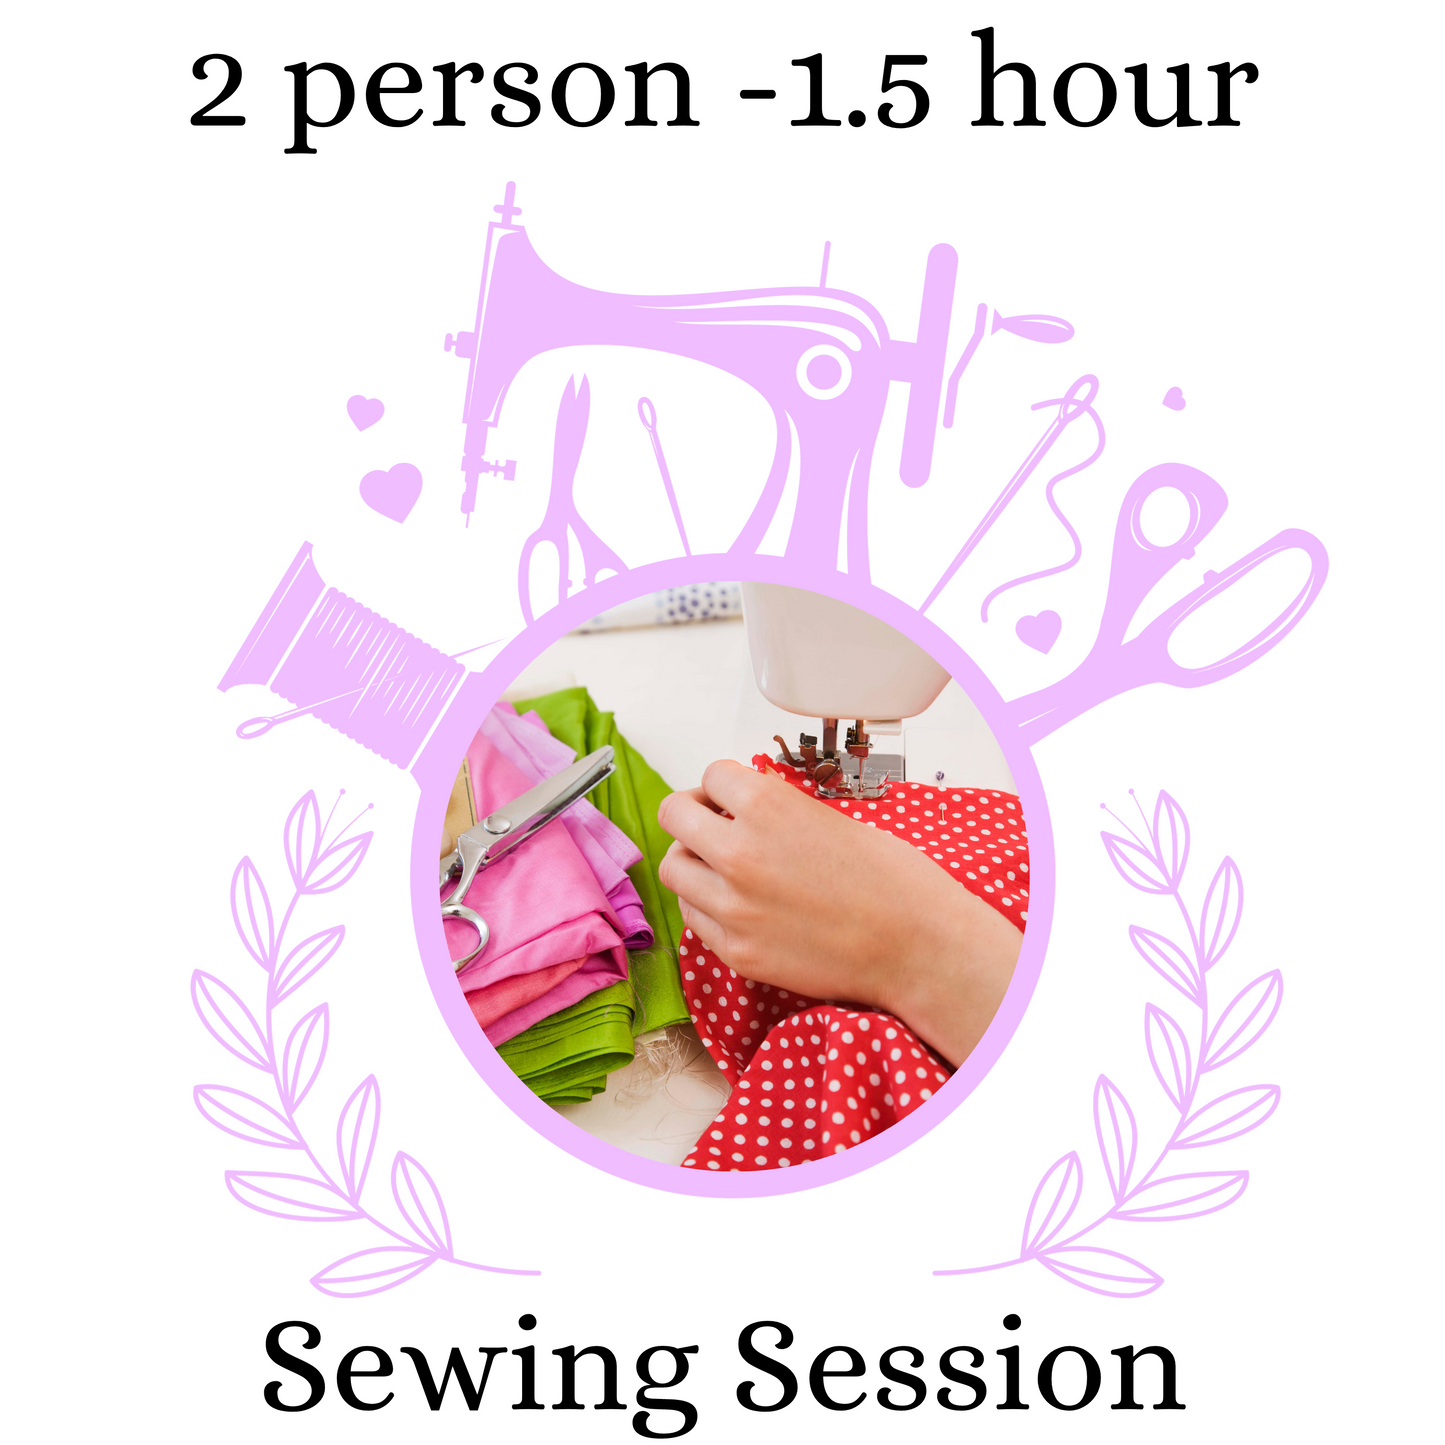 Sewing Class - 2 person for 1.5 hours